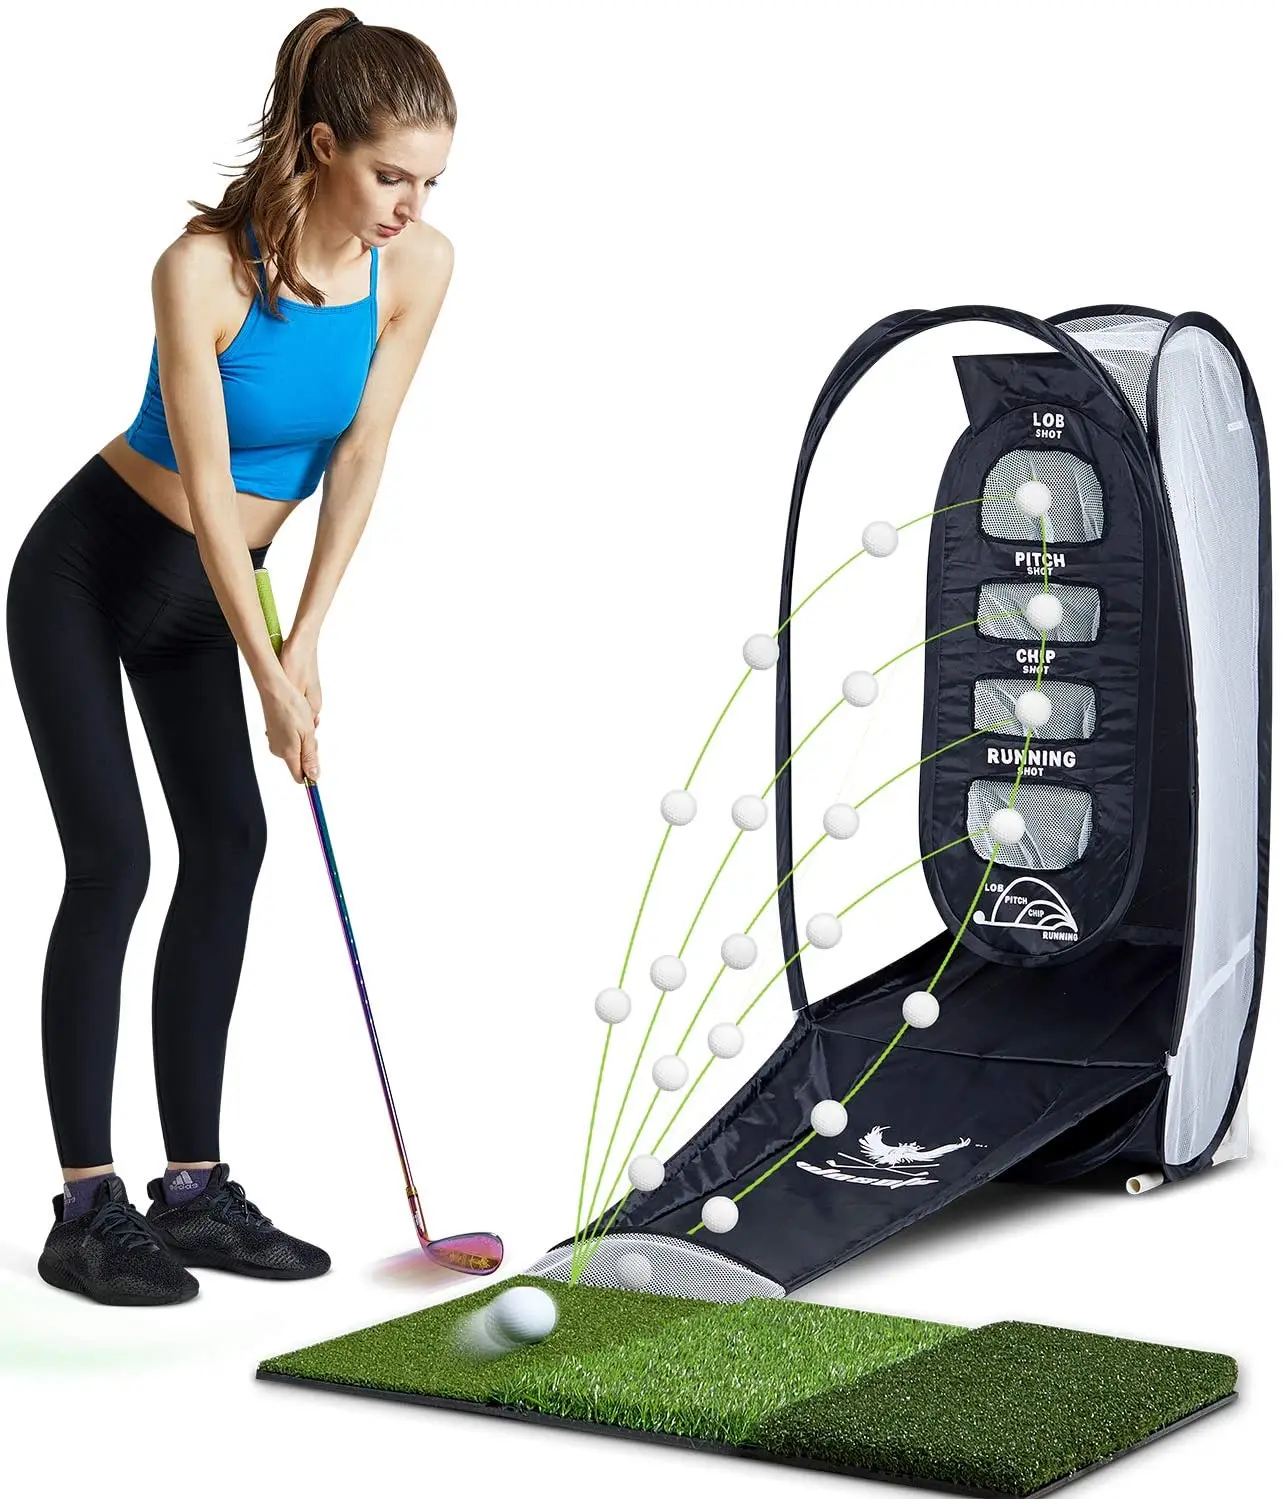 

Backyard Collapsible Golf Hitting Net Indoor Chipping Practice Target Training Aids, Black